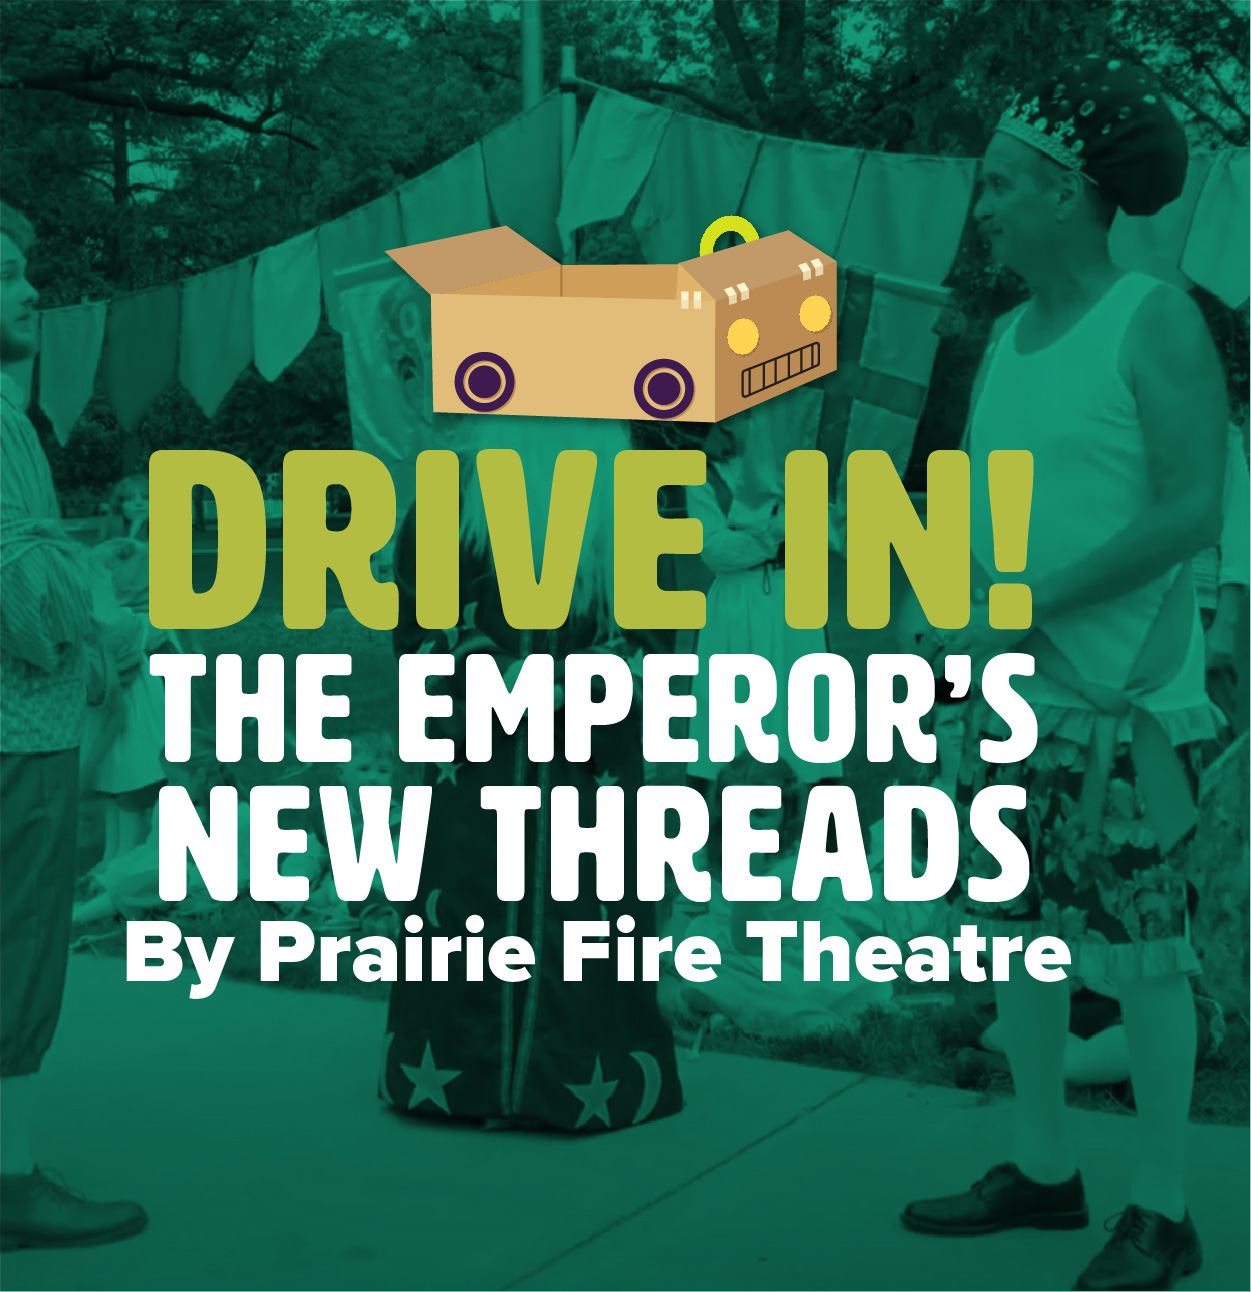 Drive In! The Emperor's New Threads by Prairie Fire Theatre